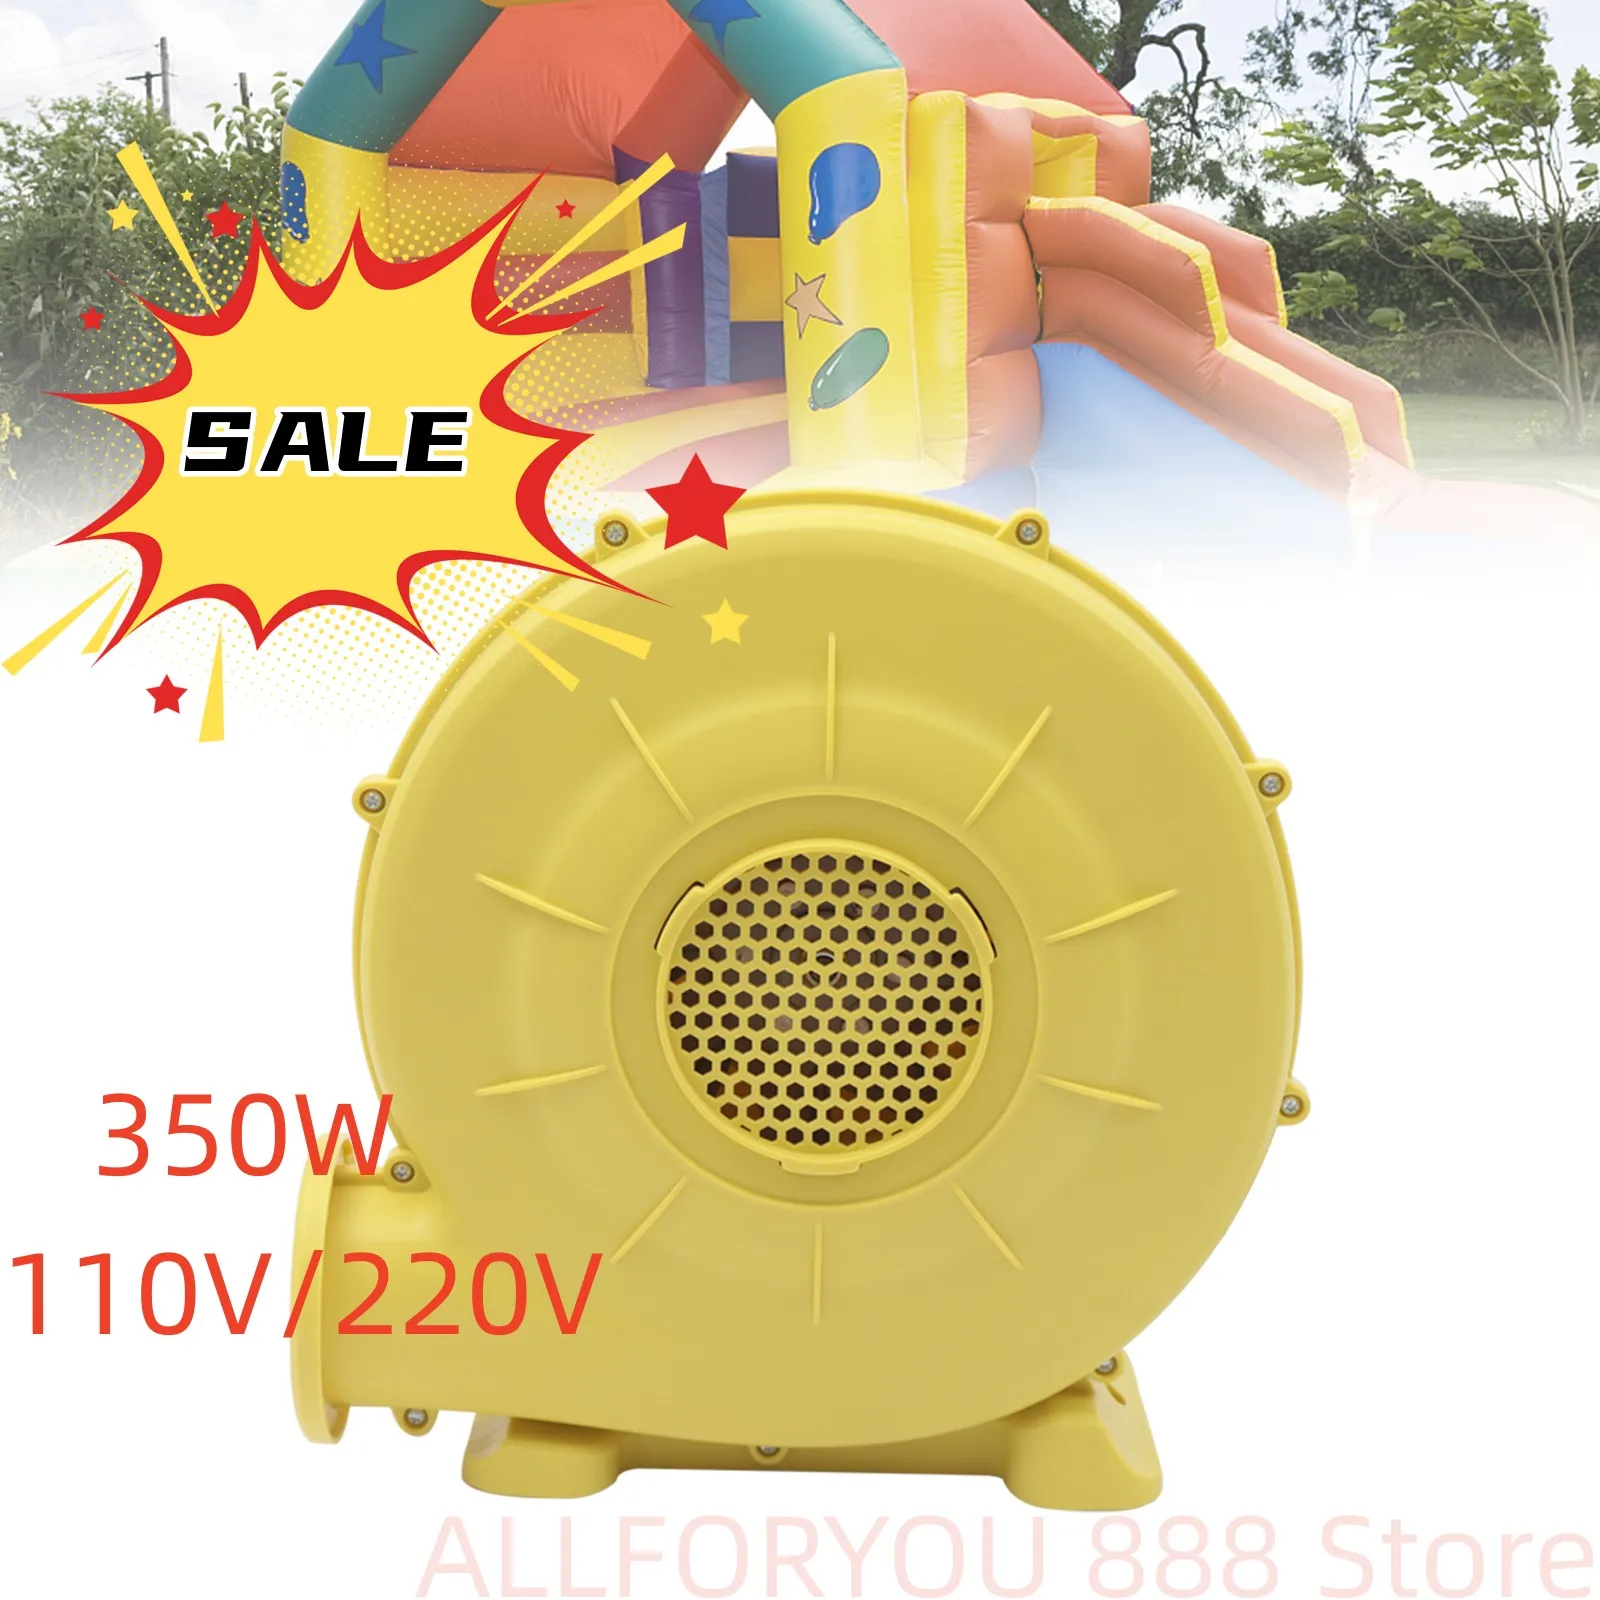 350W Air Blower Suitable For Outdoor Bounce Houses, Water slides, Obstacle Courses 110V/220V adidas alpha bounce slides 2 0 grethrgretwogrethr